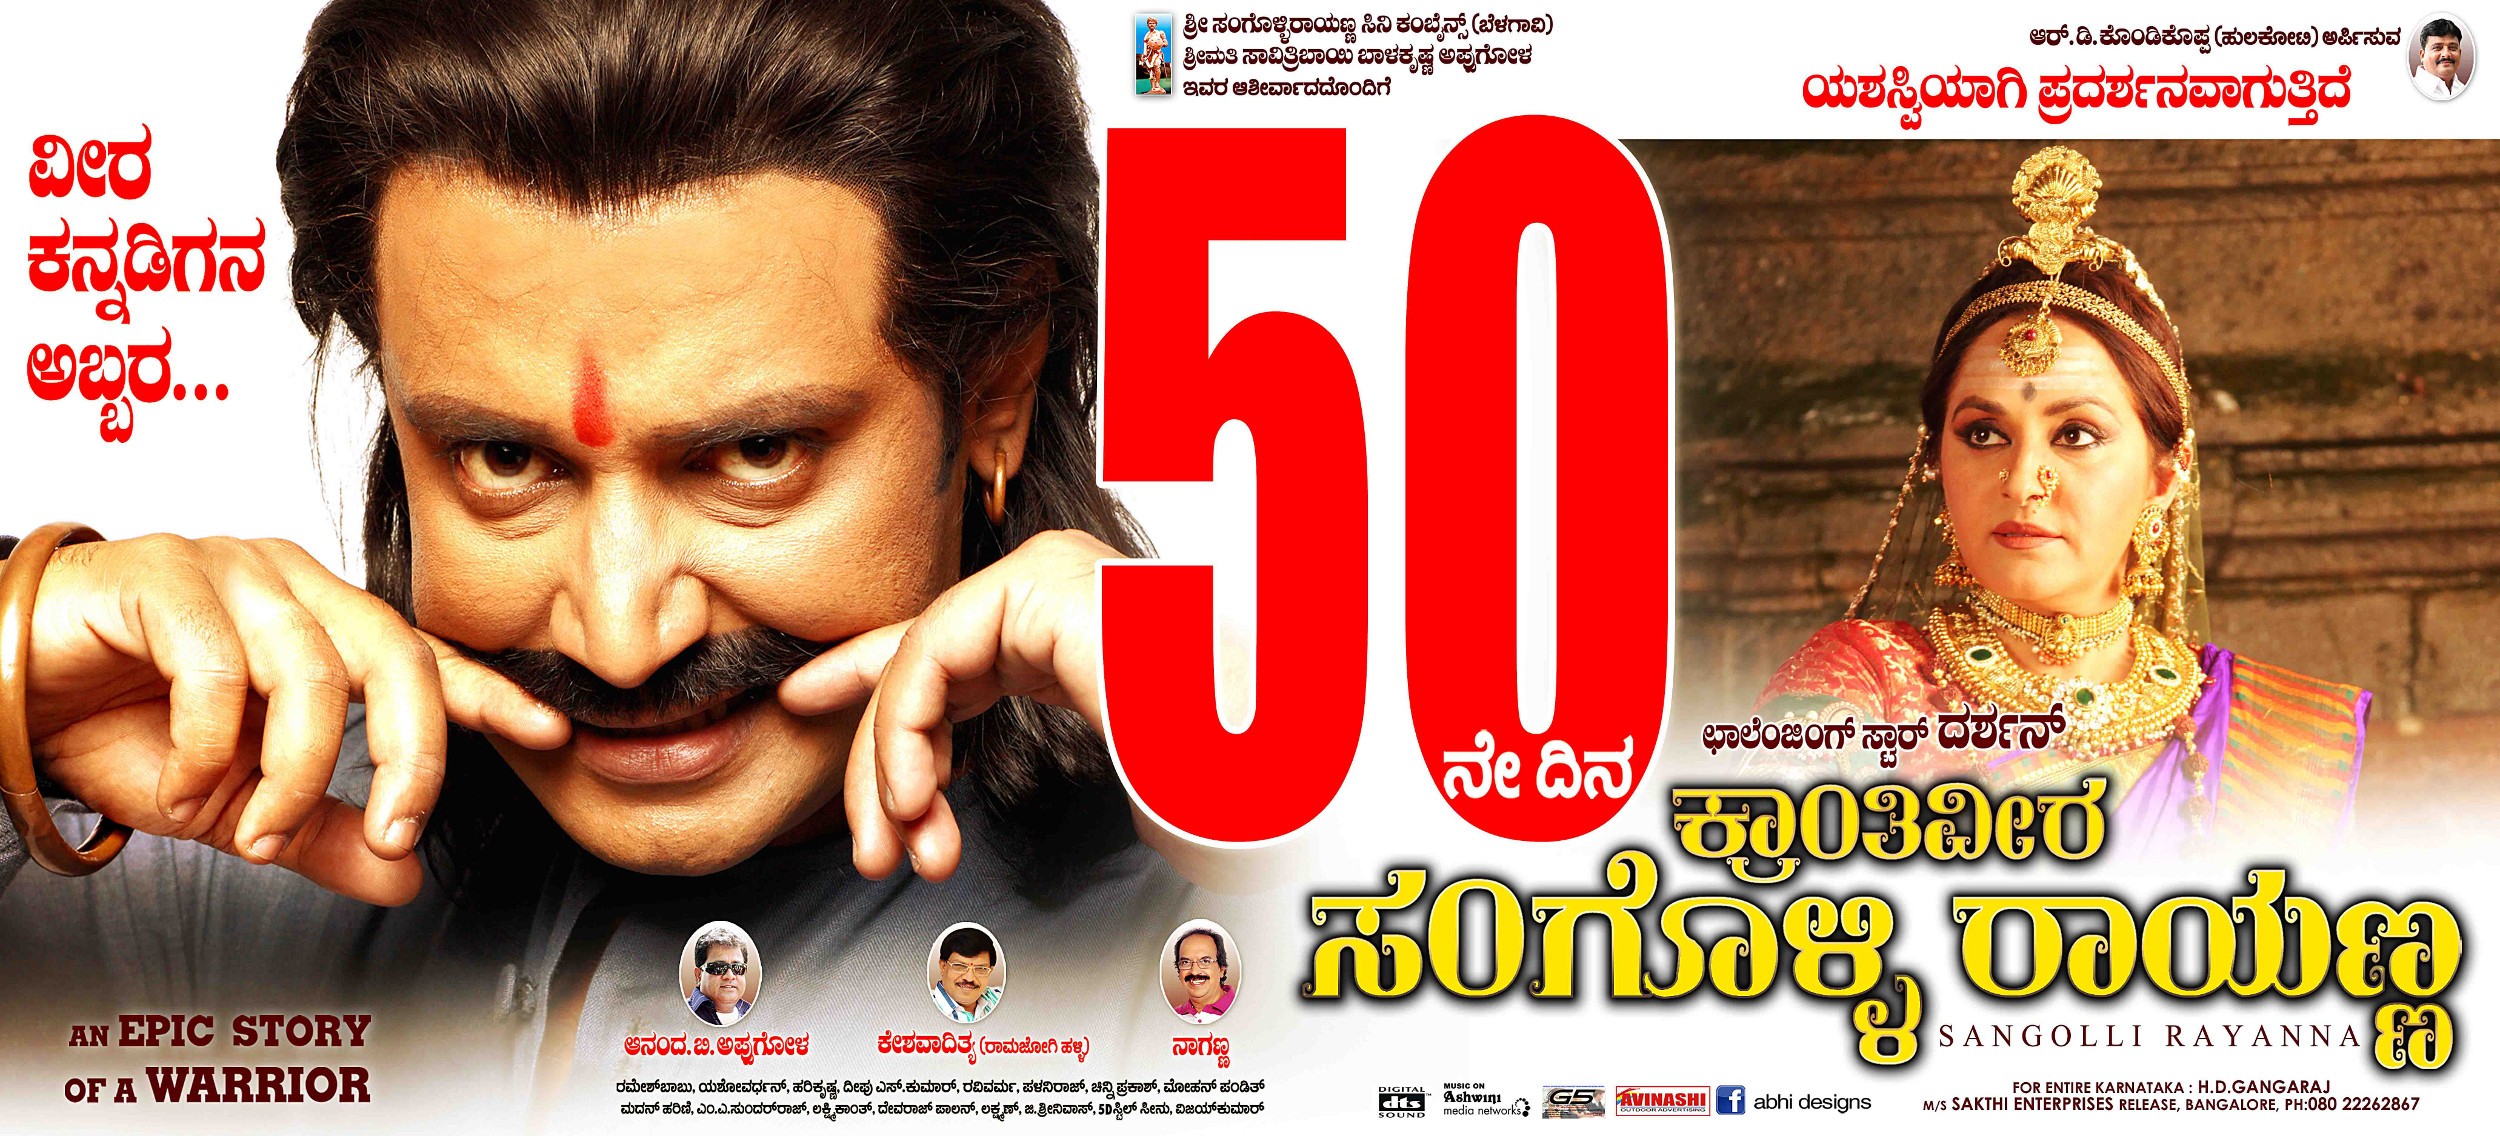 Mega Sized Movie Poster Image for Sangolli Rayanna (#55 of 79)